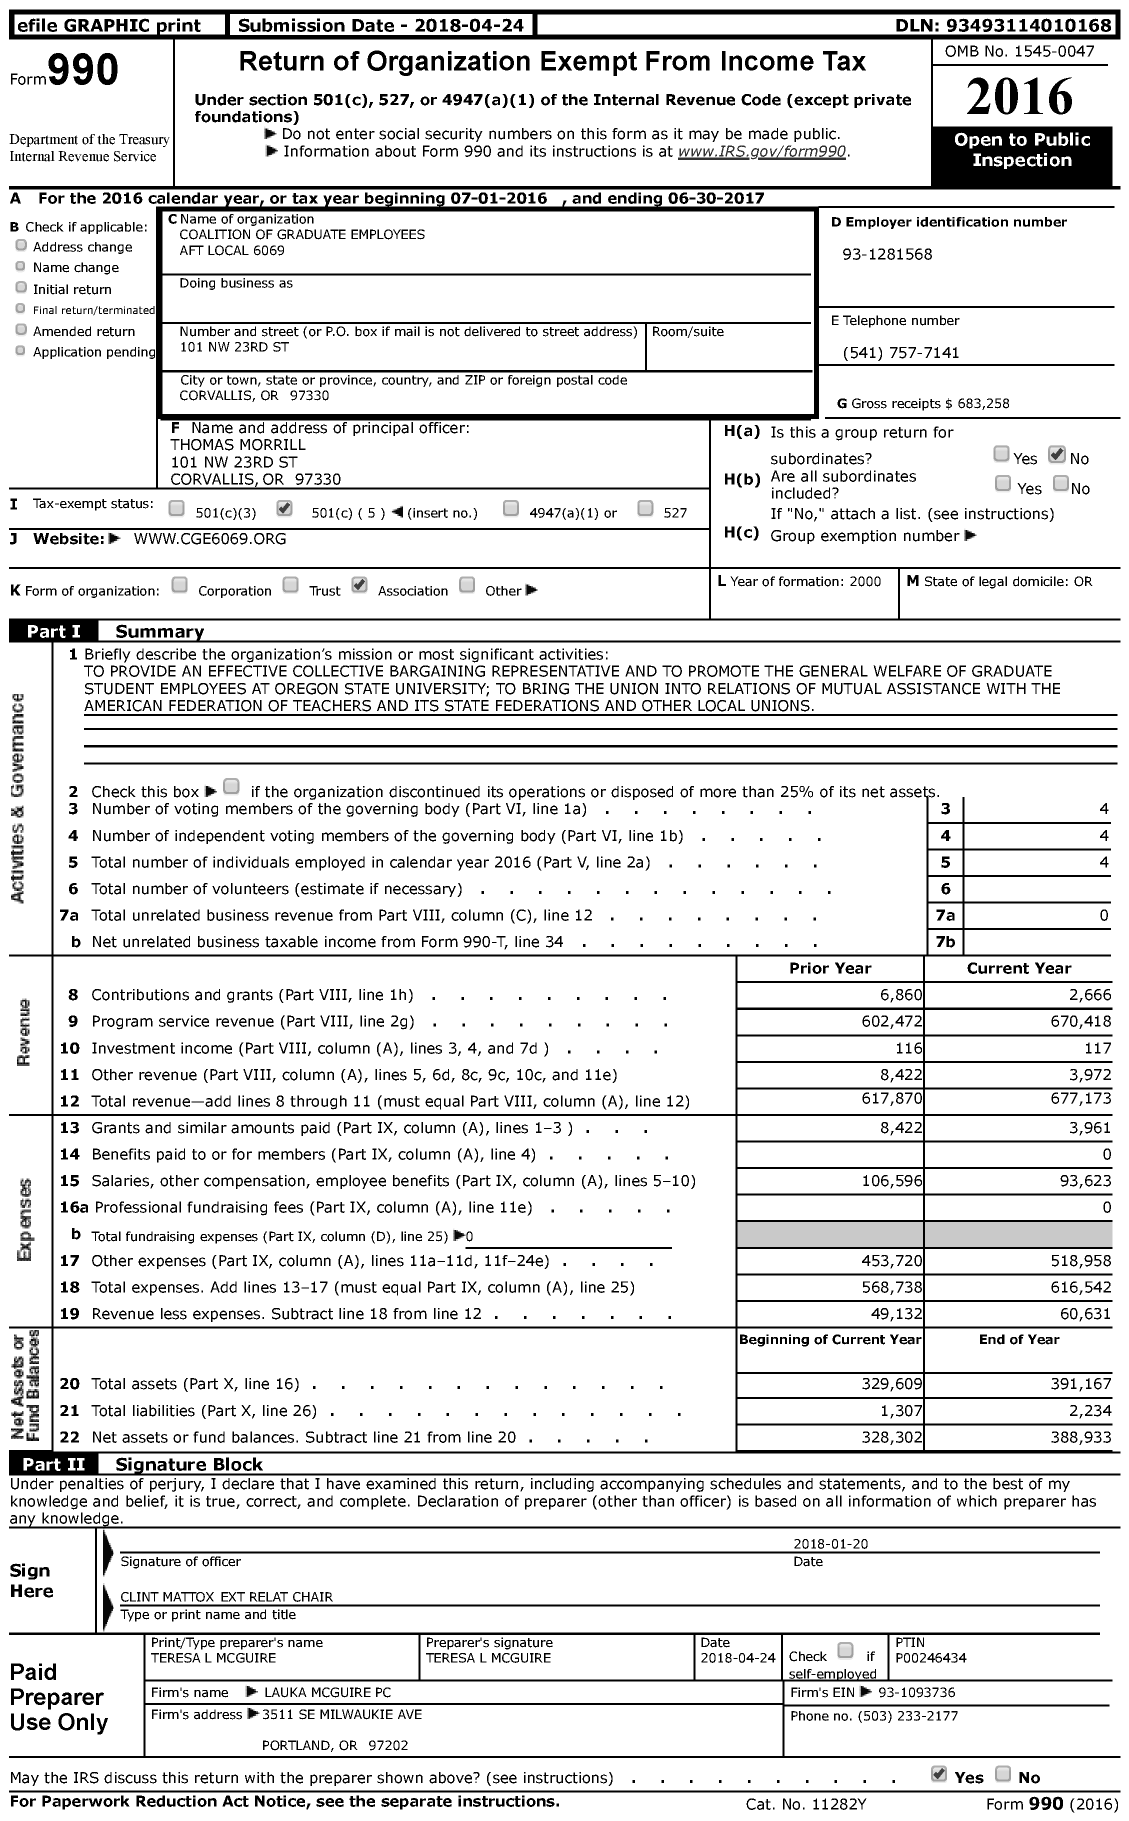 Image of first page of 2016 Form 990 for American Federation of Teachers - 6069 Coalition of Graduate Employee